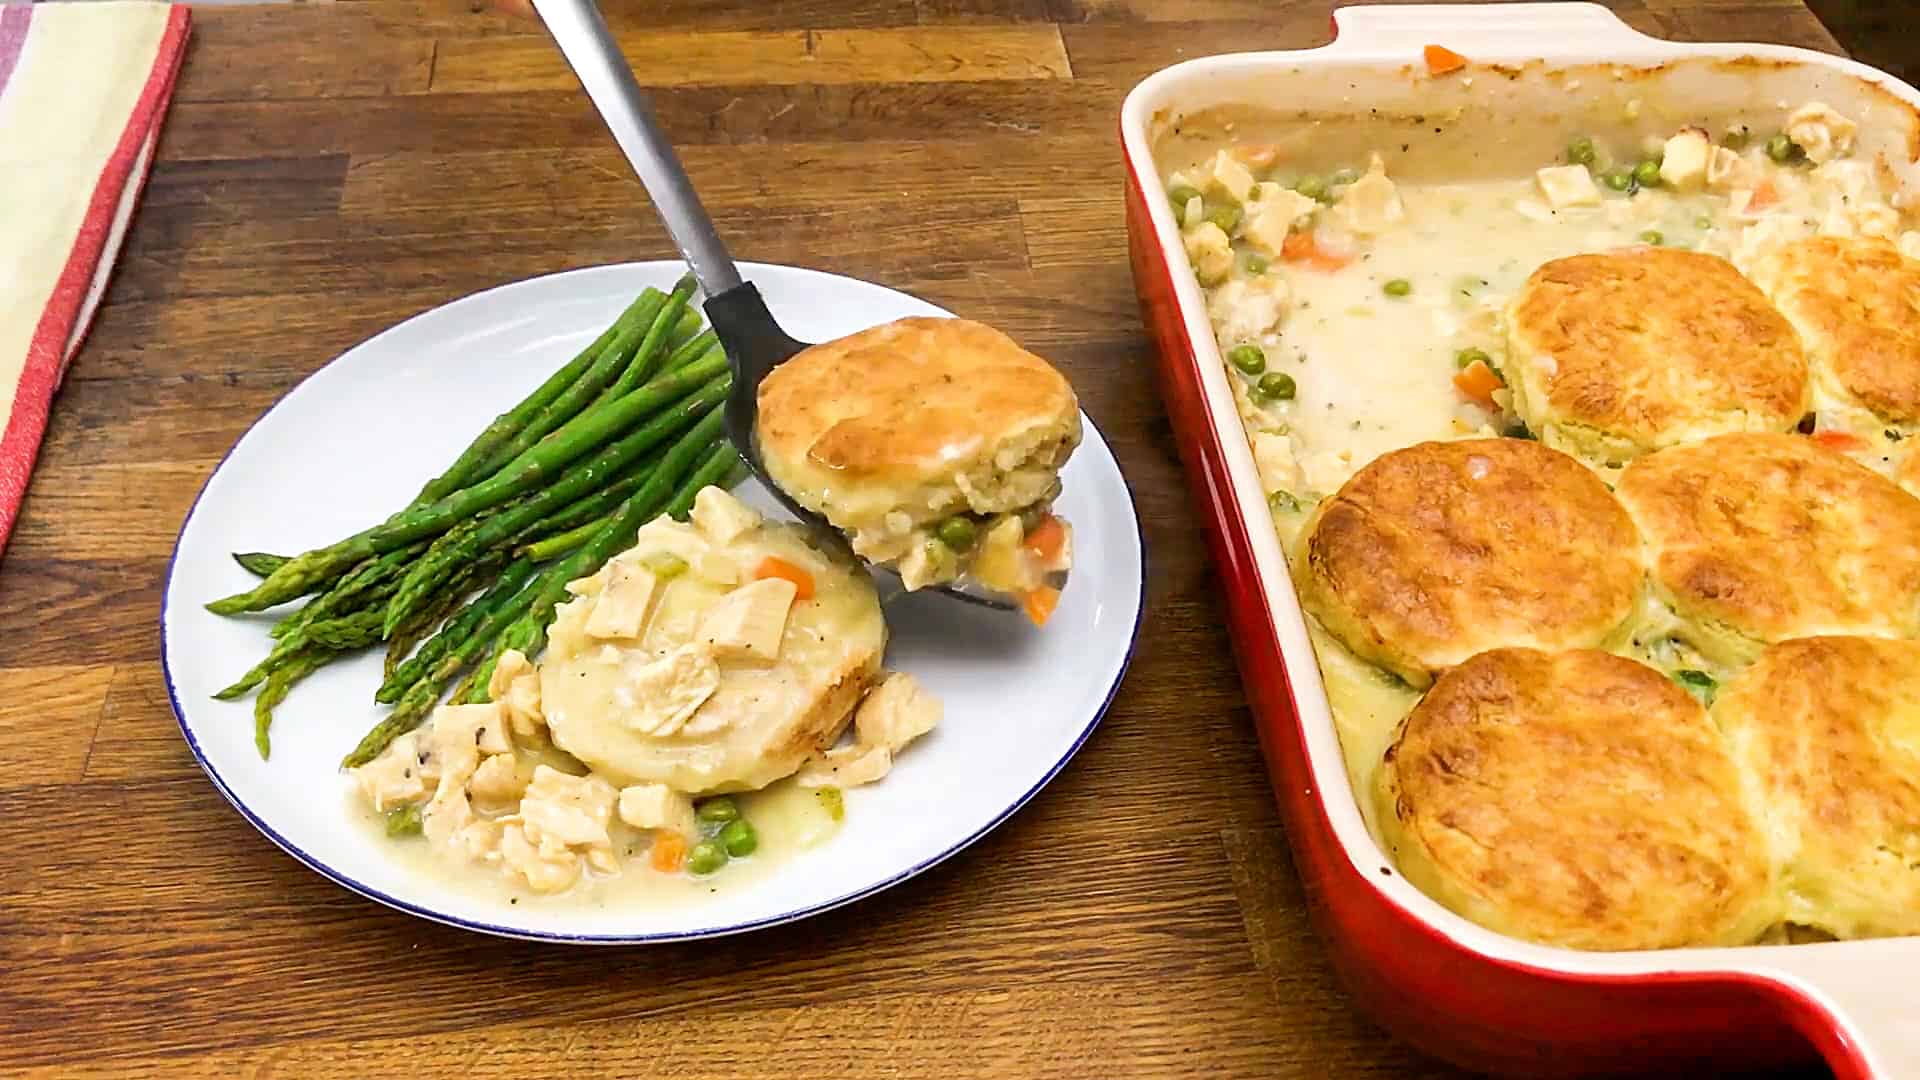 biscuits are golden brown serving with asparagus